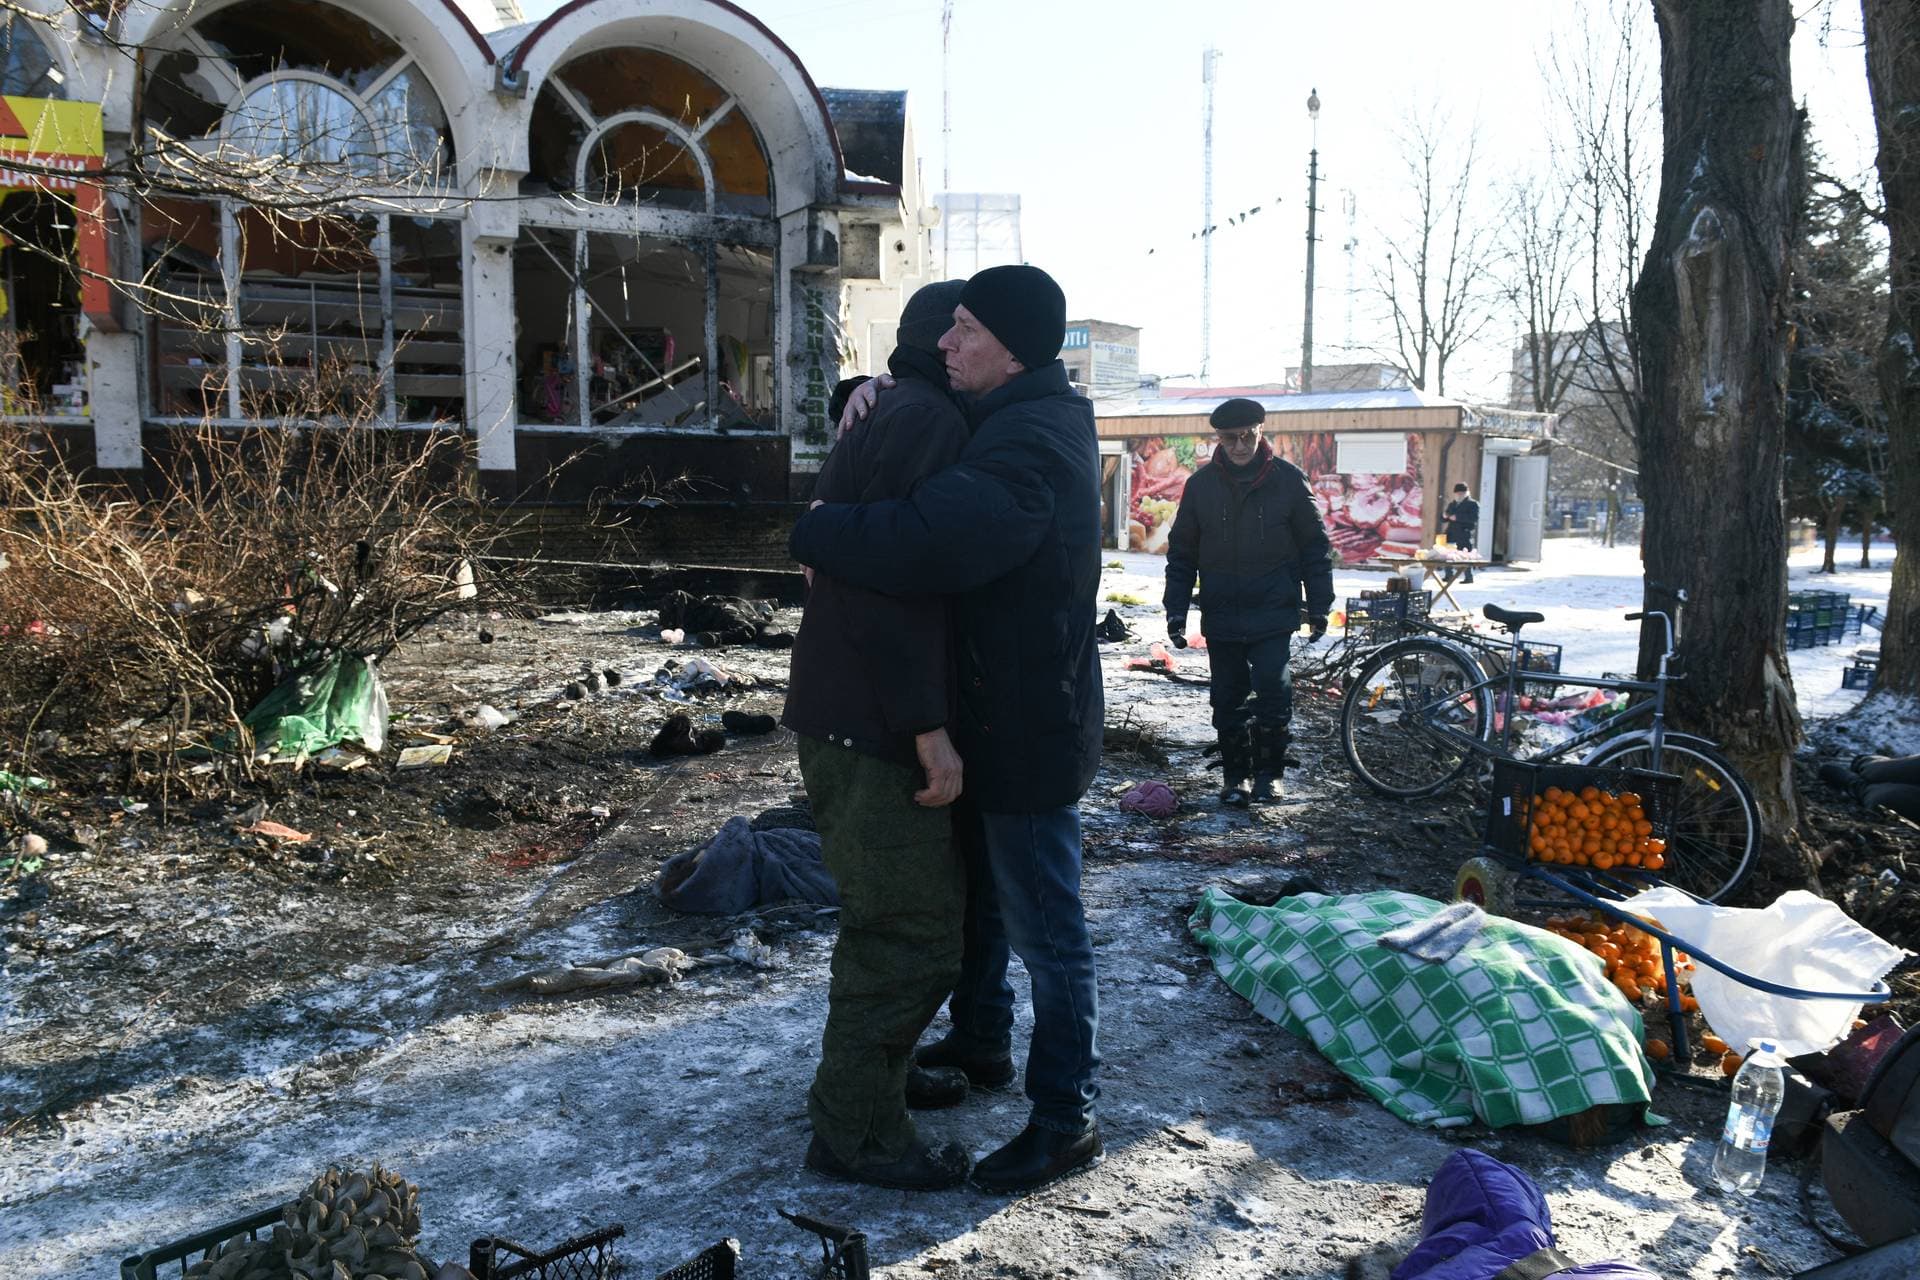 Two men embrace at the scene of a deadly shelling attack in Donetsk